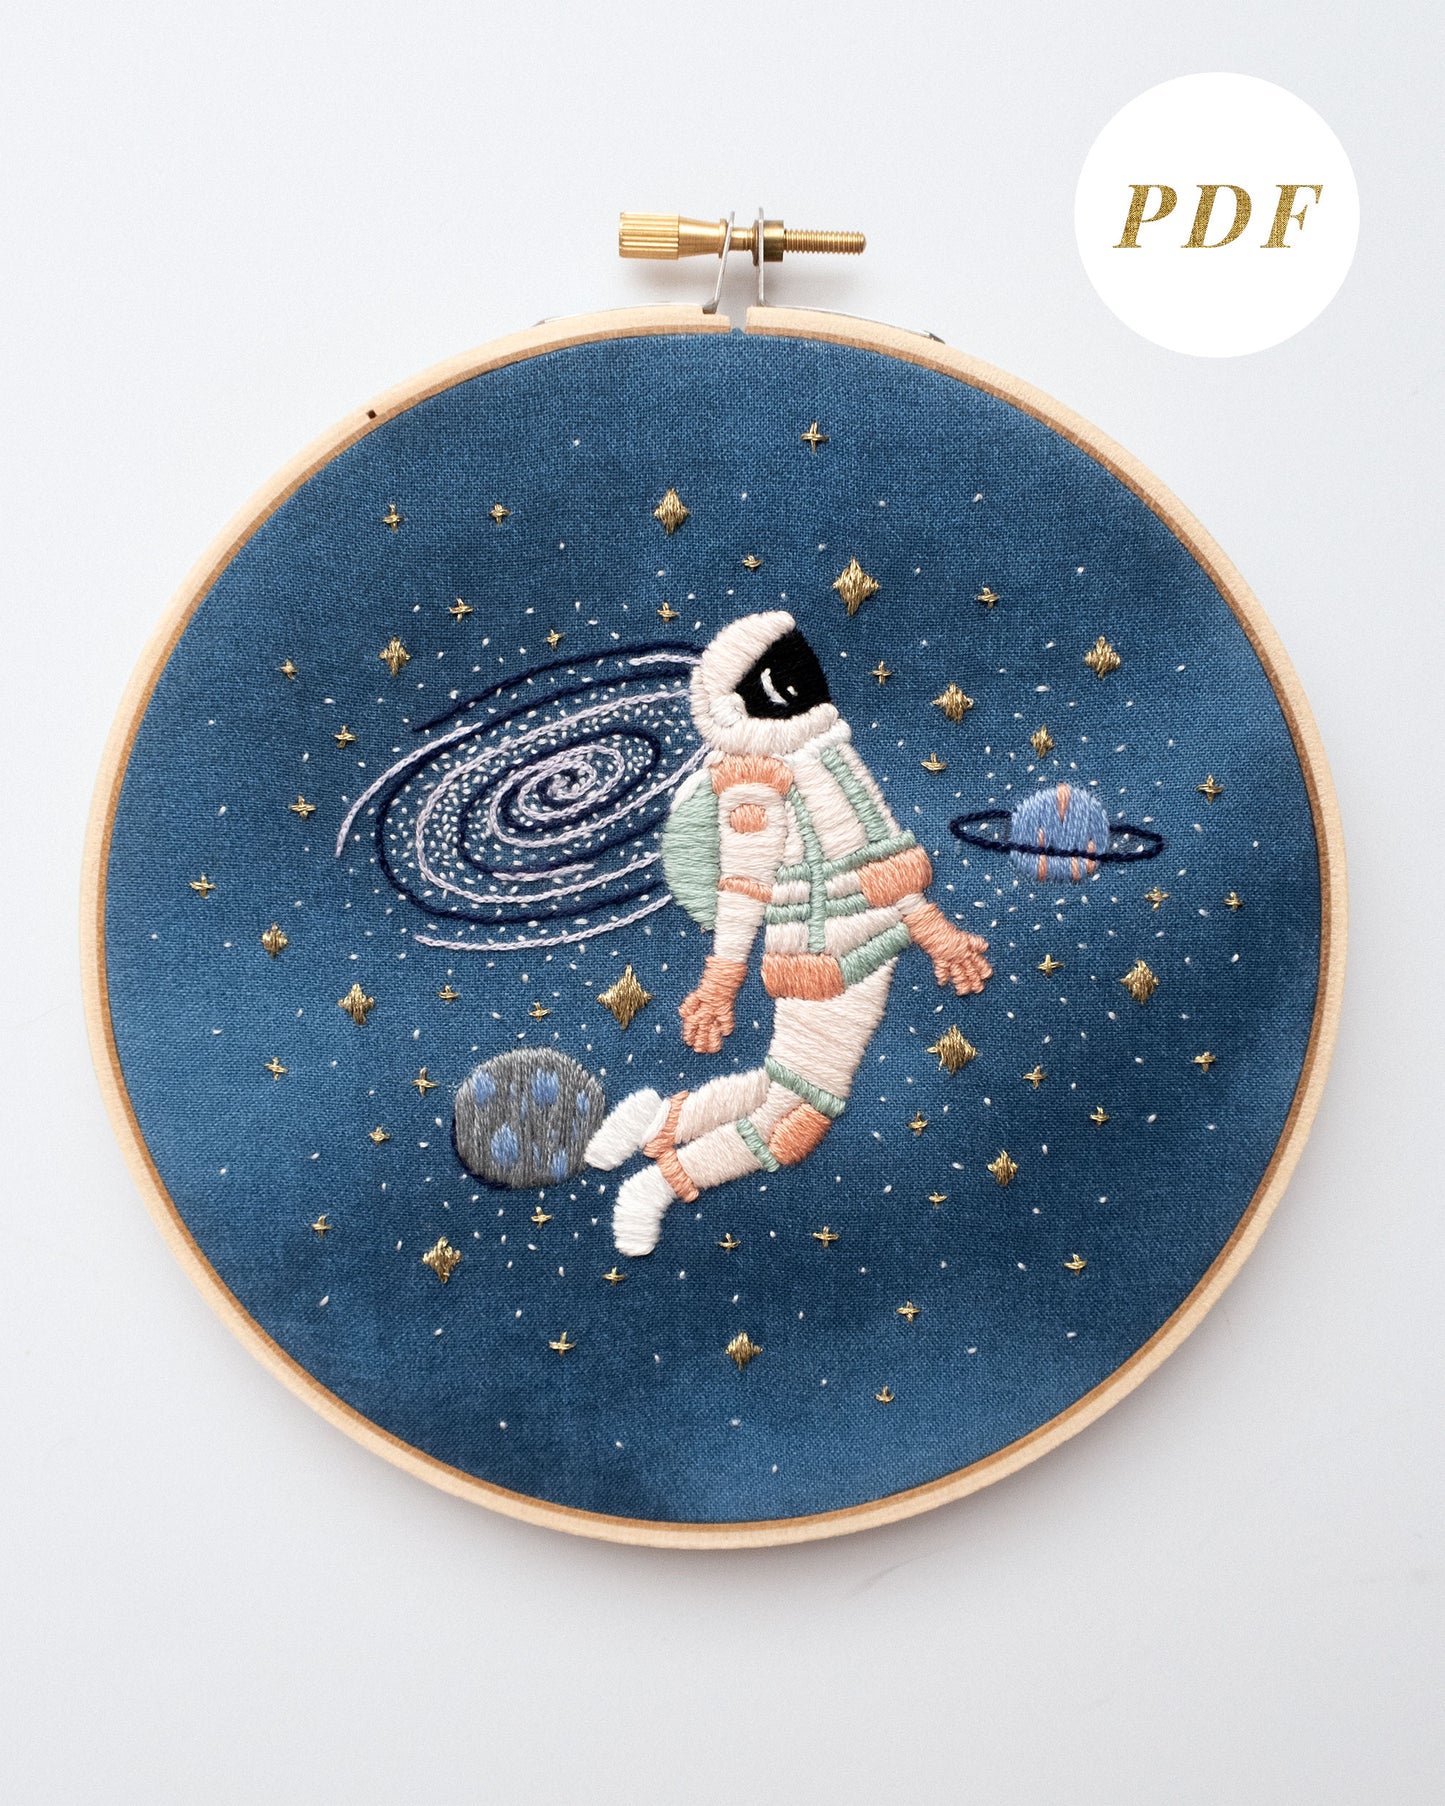 The Curious Astronaut Embroidery Pattern